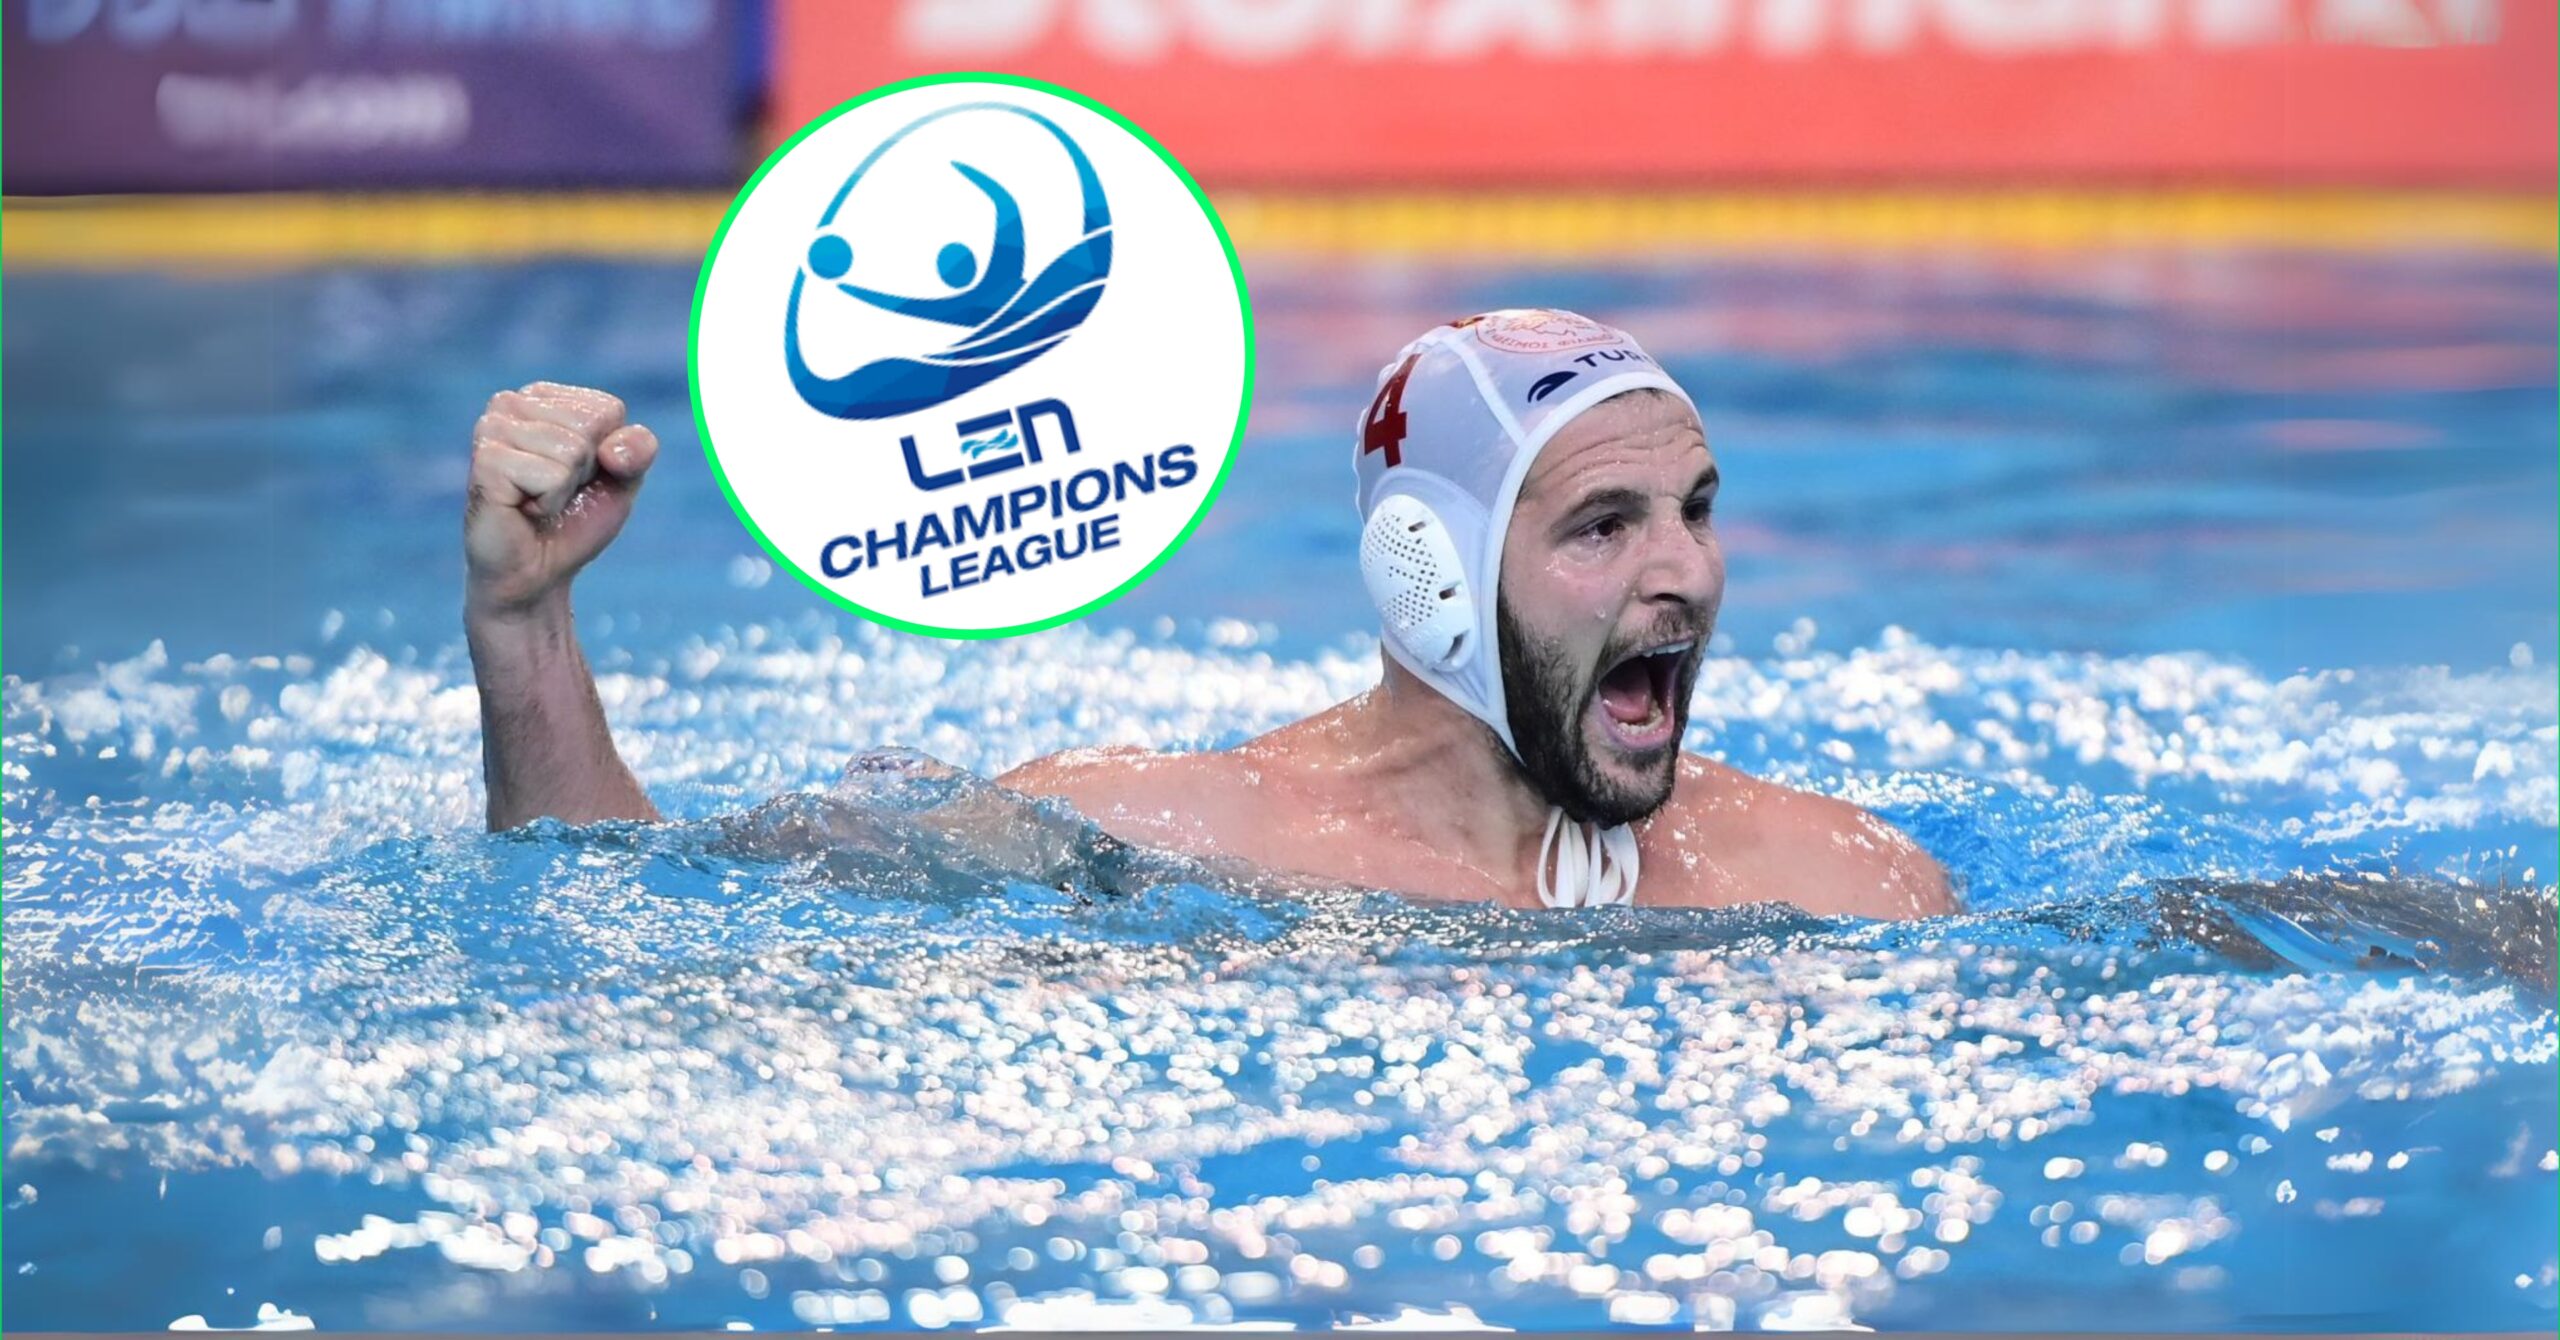 Champions League Water Polo